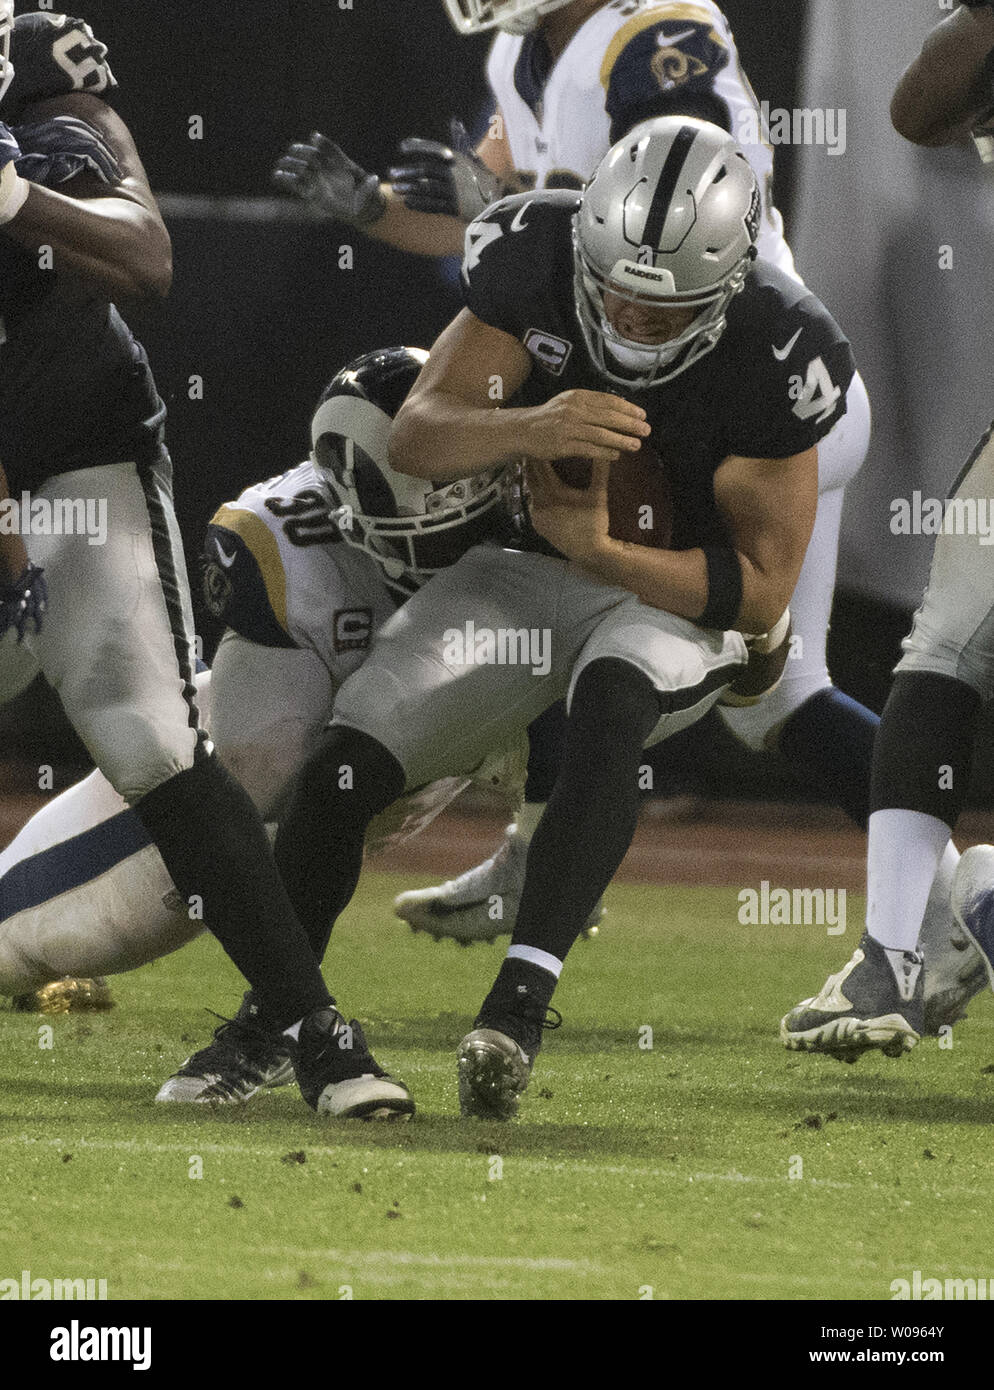 Oakland Raiders QB Derek Carr (4) is sacked by Los Angeles Rams Michael Brockers for a loss of three yards in the third quarter at the Coliseum in Oakland, California on Monday, September 10, 2018. The Rams defeated the Raiders 33-13.       Photo by Terry Schmitt/UPI Stock Photo